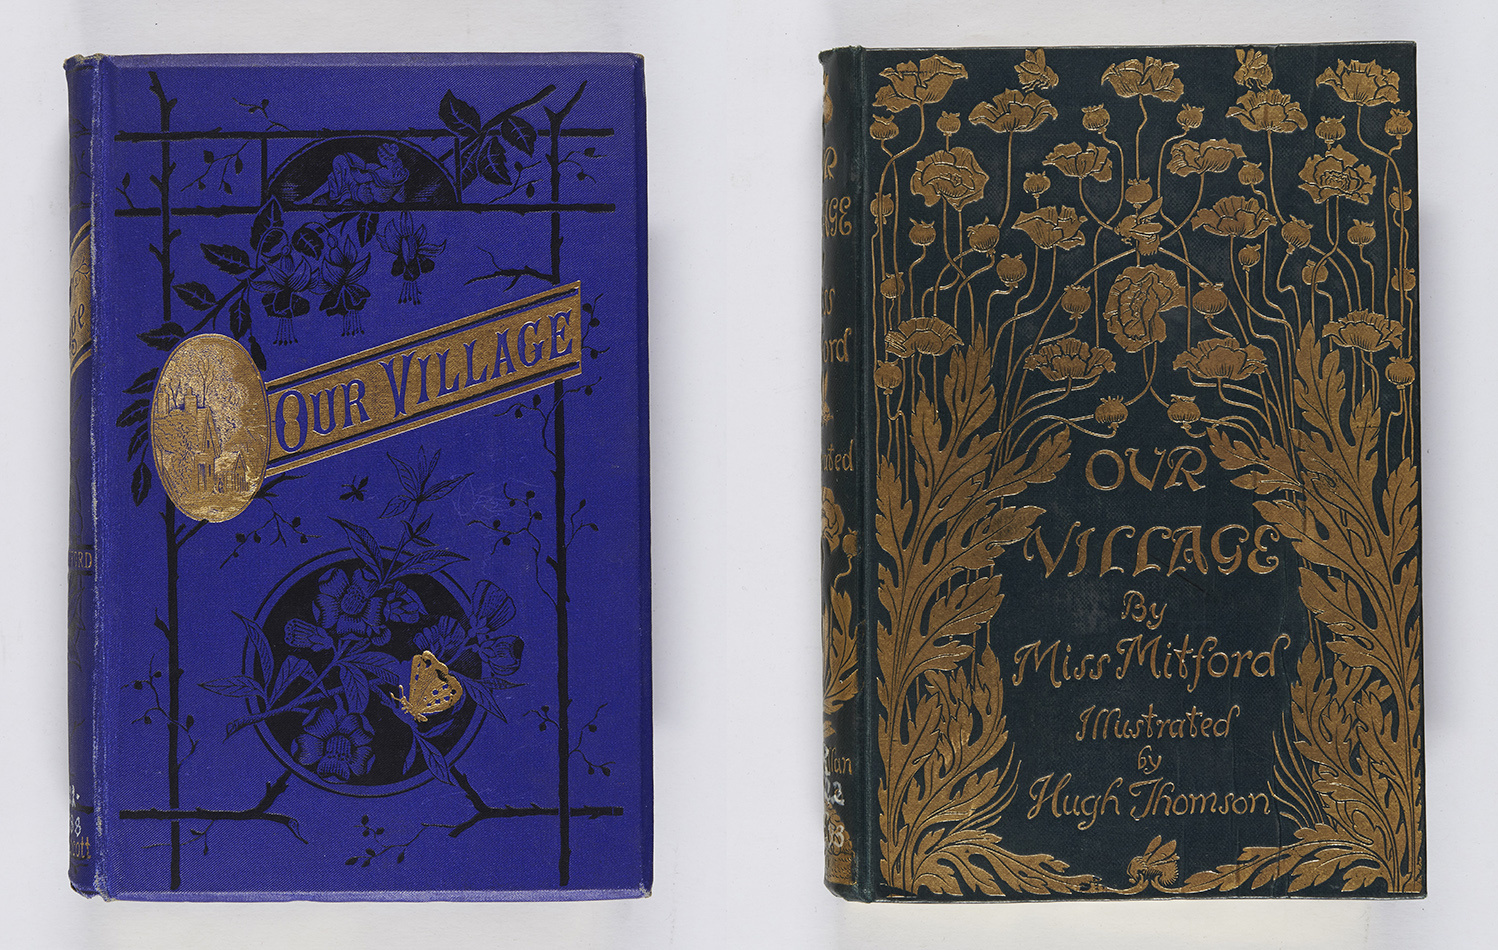  Two contrasting designs for Miss Mitford’s Our Village; published only five years apart they clearly illustrate changes in design between the 1880s (left) and 1890s (right). Mary Russell Mitford, Our village: country pictures (London: Walter Scott, 1888), r PR5022.V5E88 ; Mary Russell Mitford, Our village (London: Macmillan and Co., 1893), r PR5022.V5E93.